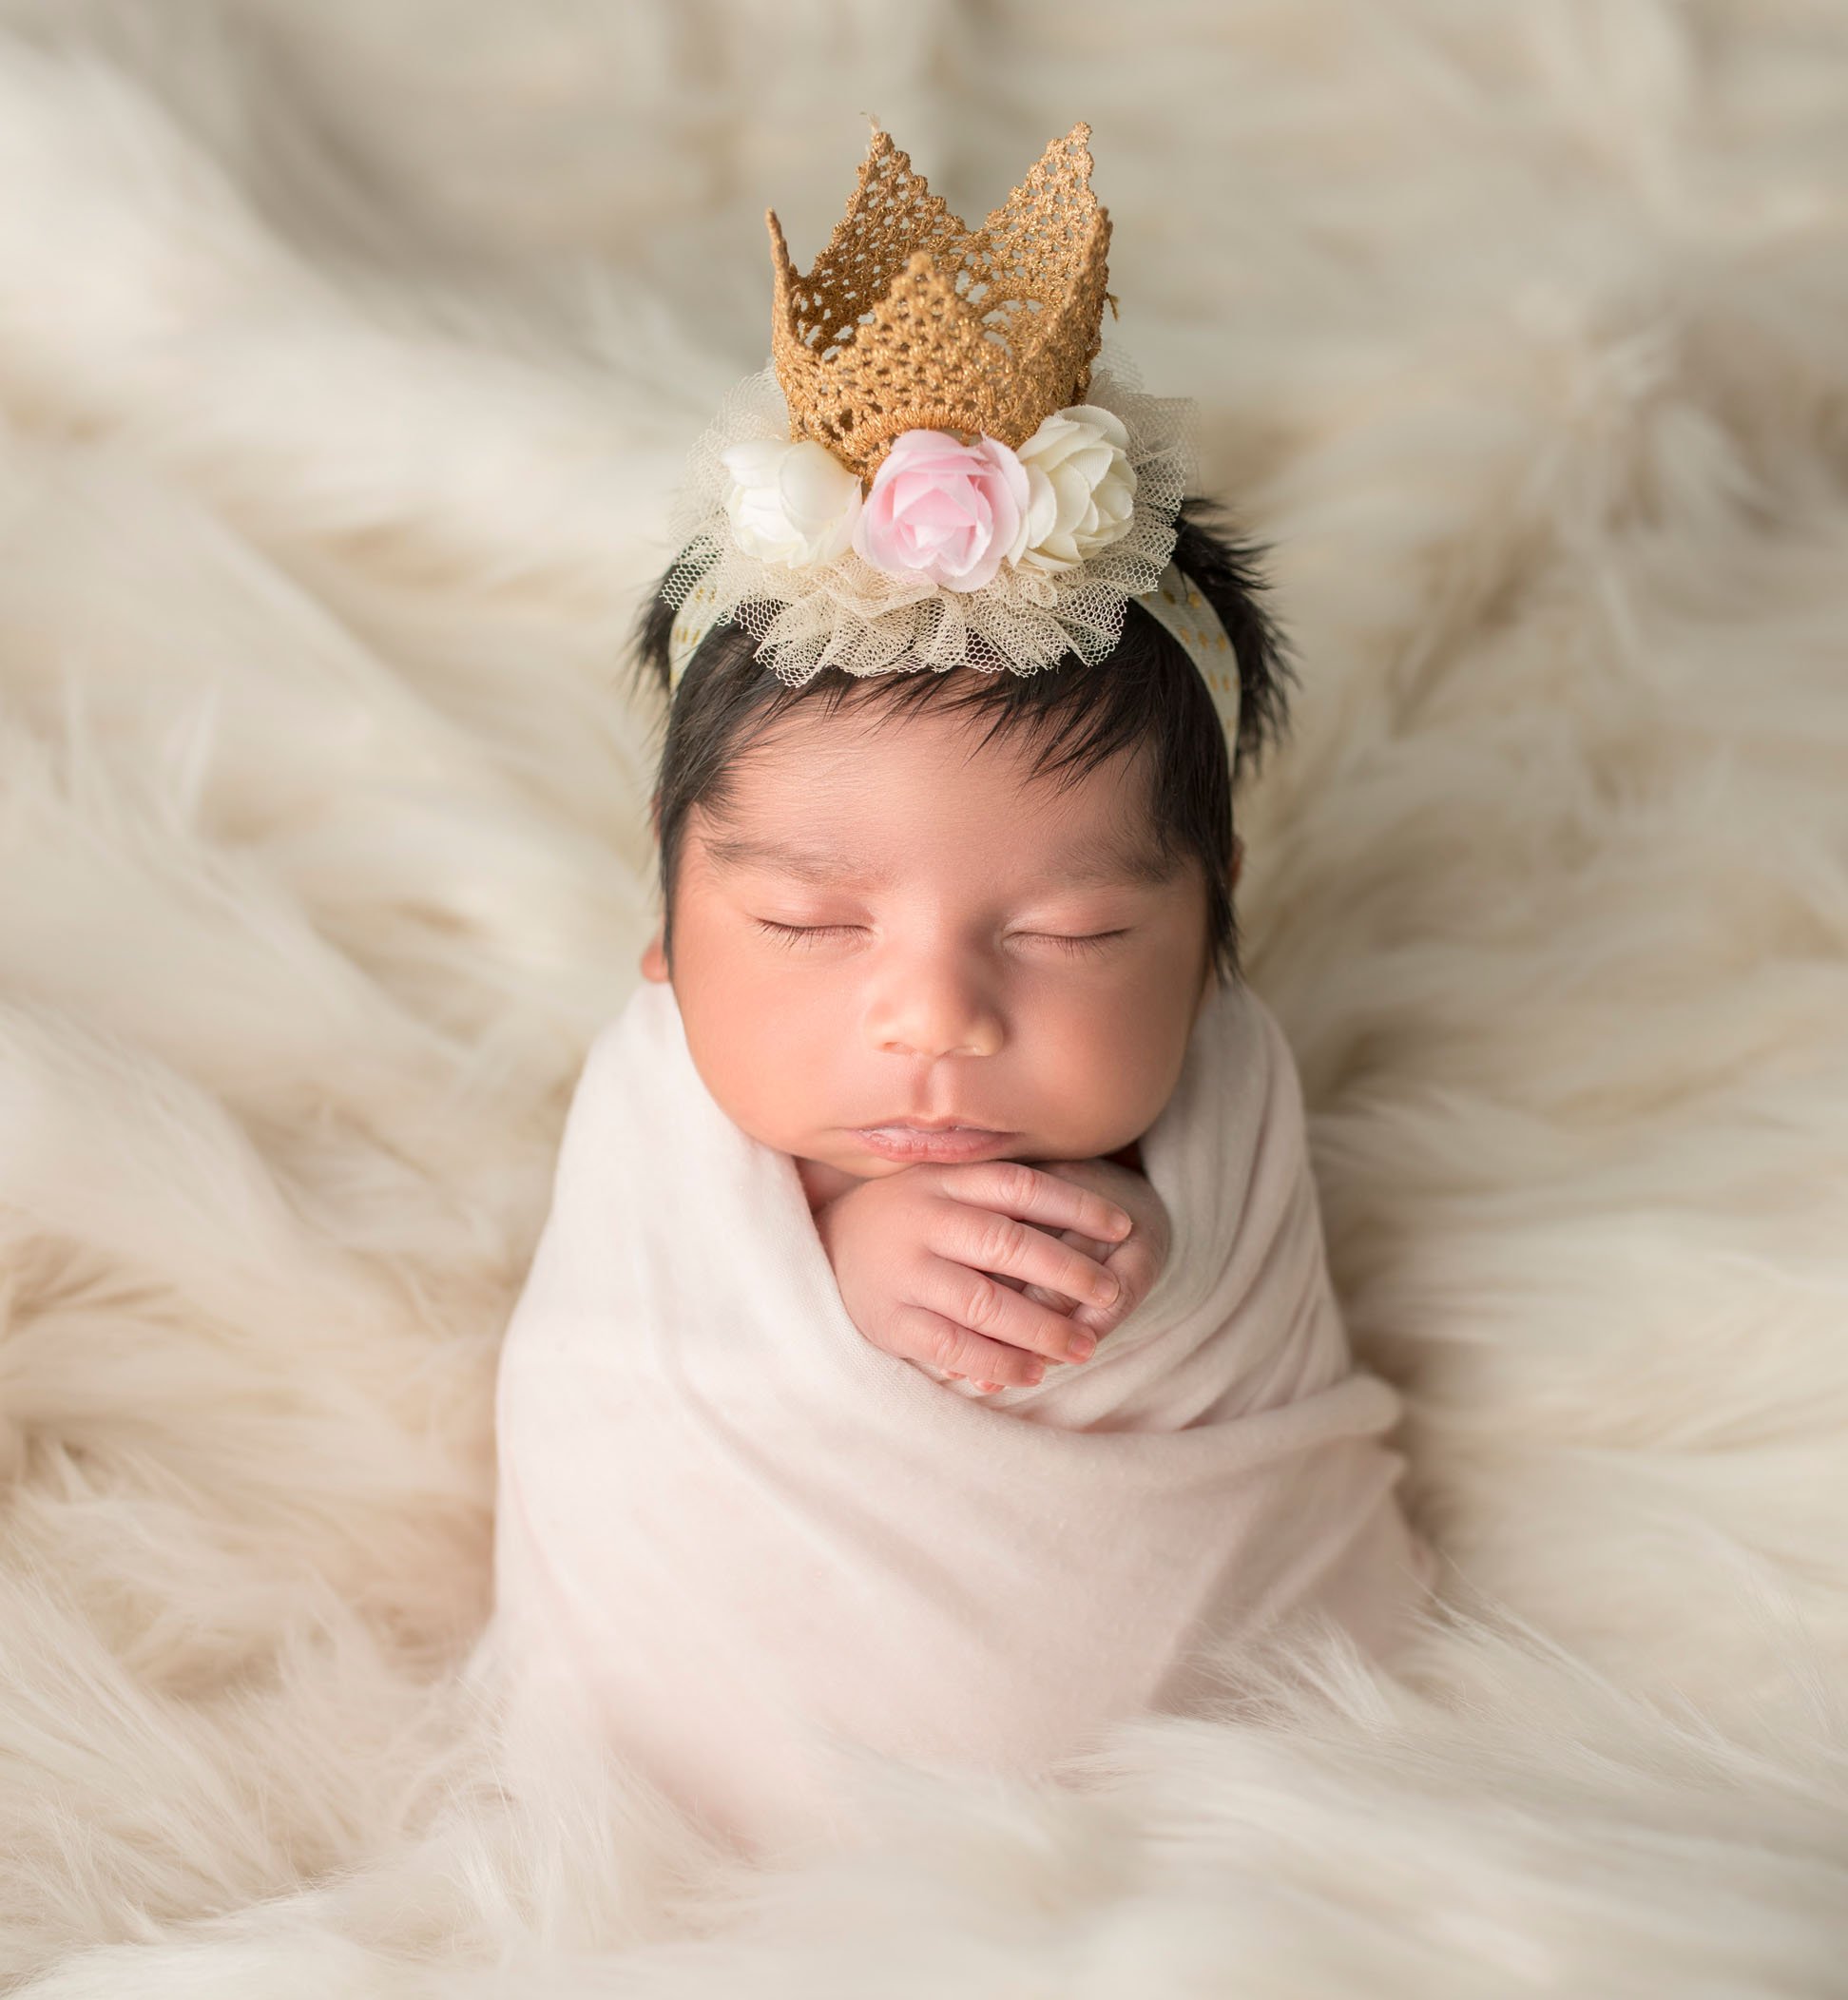 newborn baby girl in potato sack pose with floral crown on her head